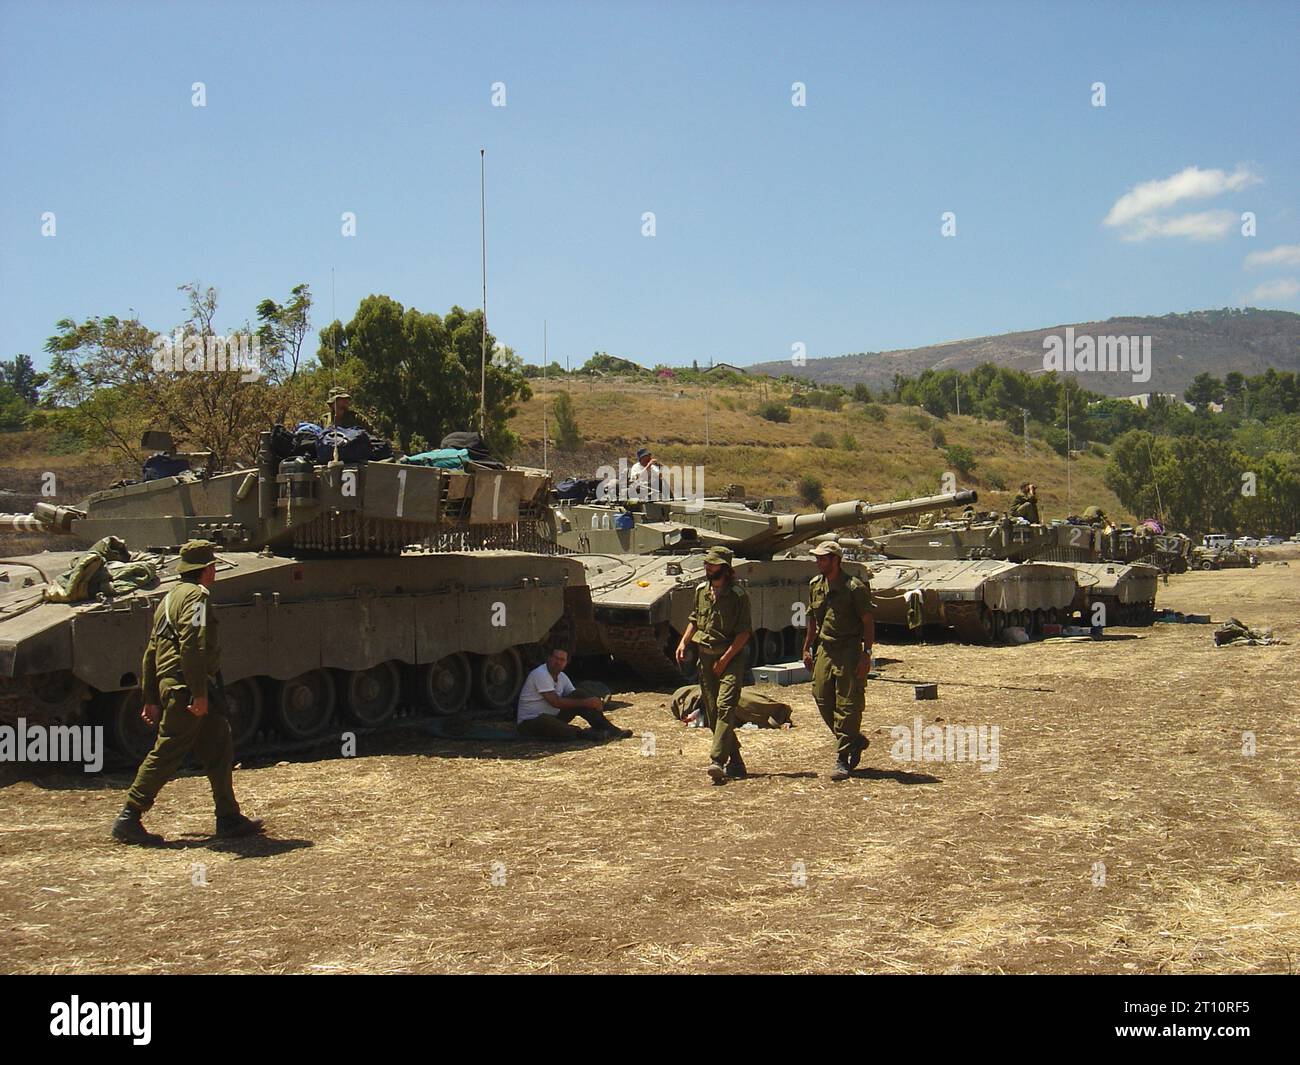 14th August 2006 The Israel-Hezbollah War 2006. After a ceasefire was announced at 08:00, Israeli Merkava 3 (Chariot) tanks are parked up just off the main road between Kfar Blum and Metula in the north-east of Israel. Stock Photo